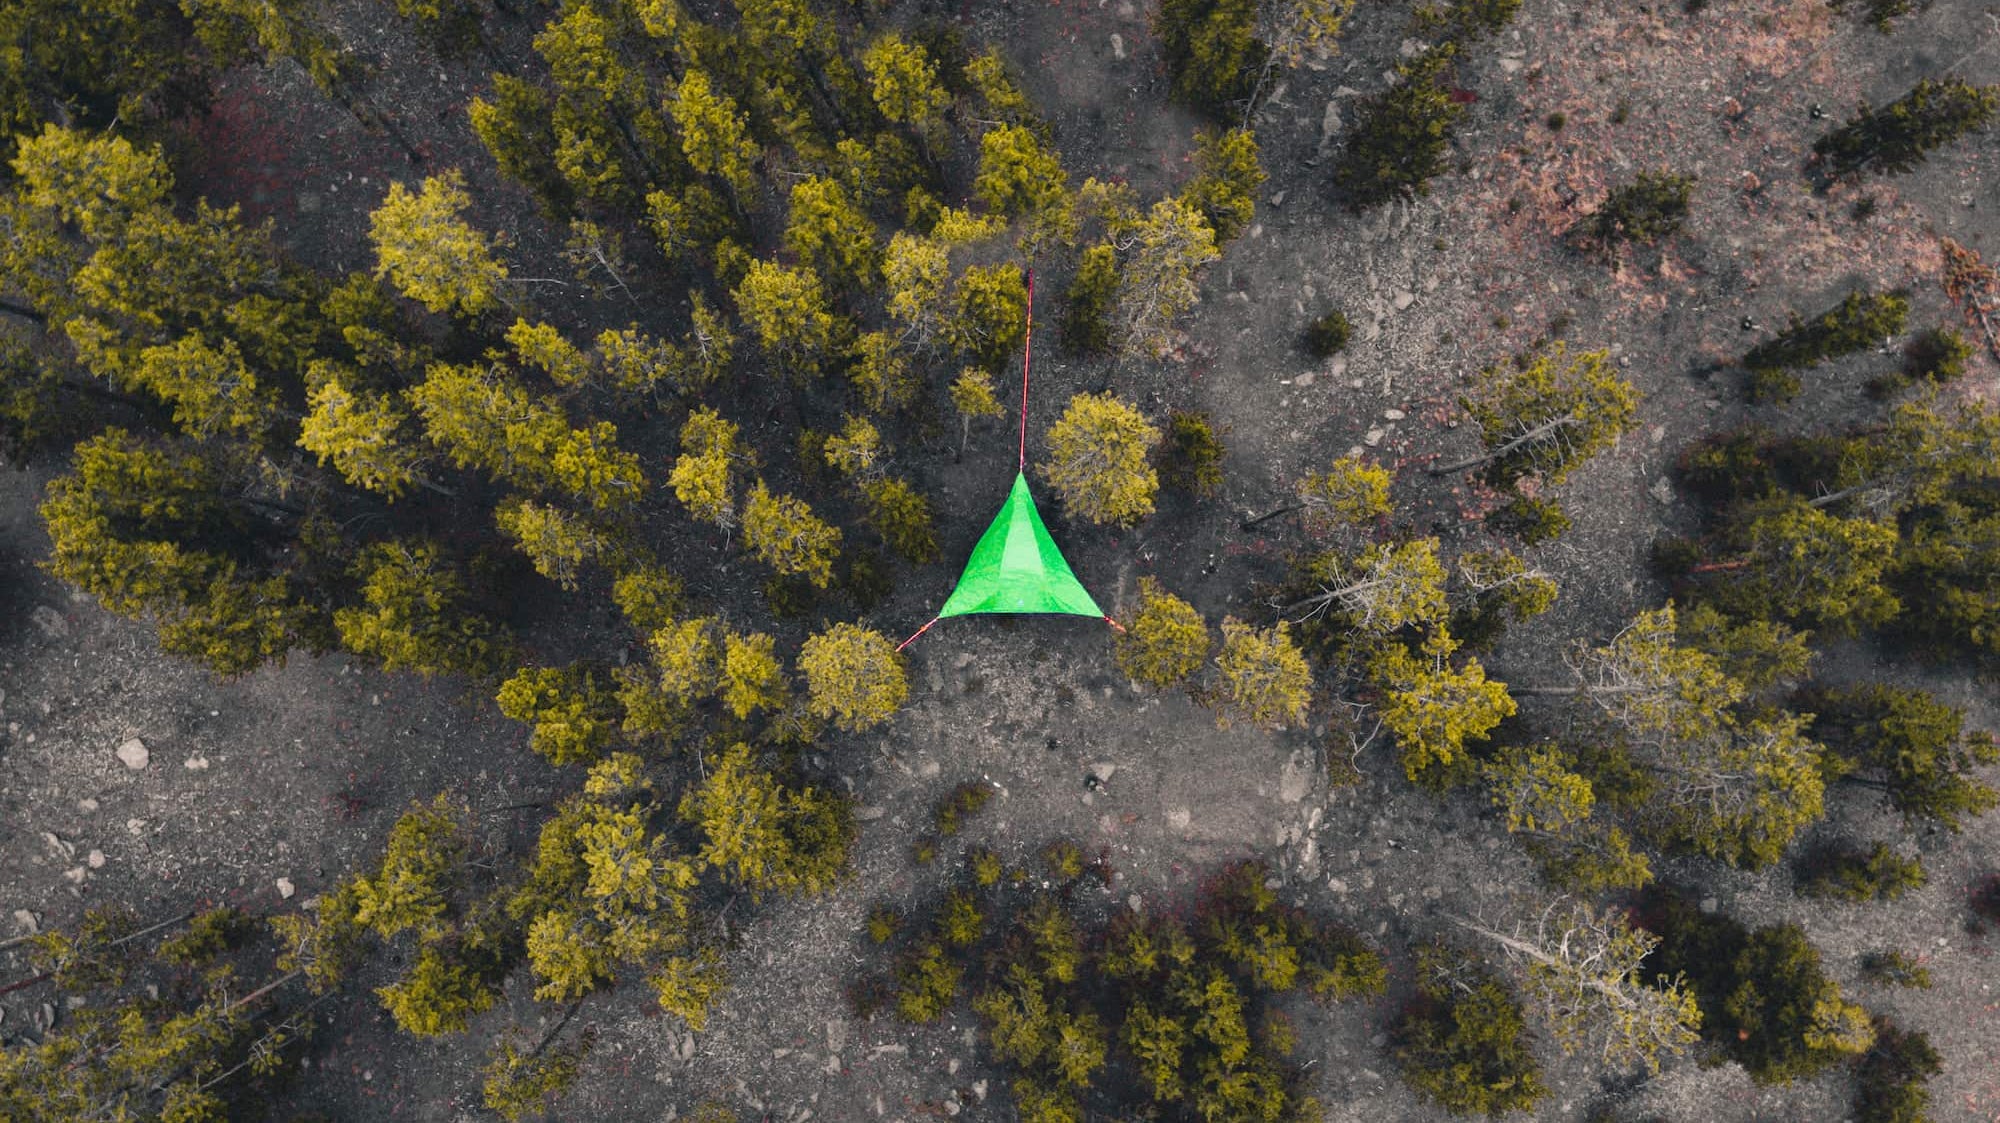 How To ‘Leave No Trace’ While Tree Tent and Hammock Camping